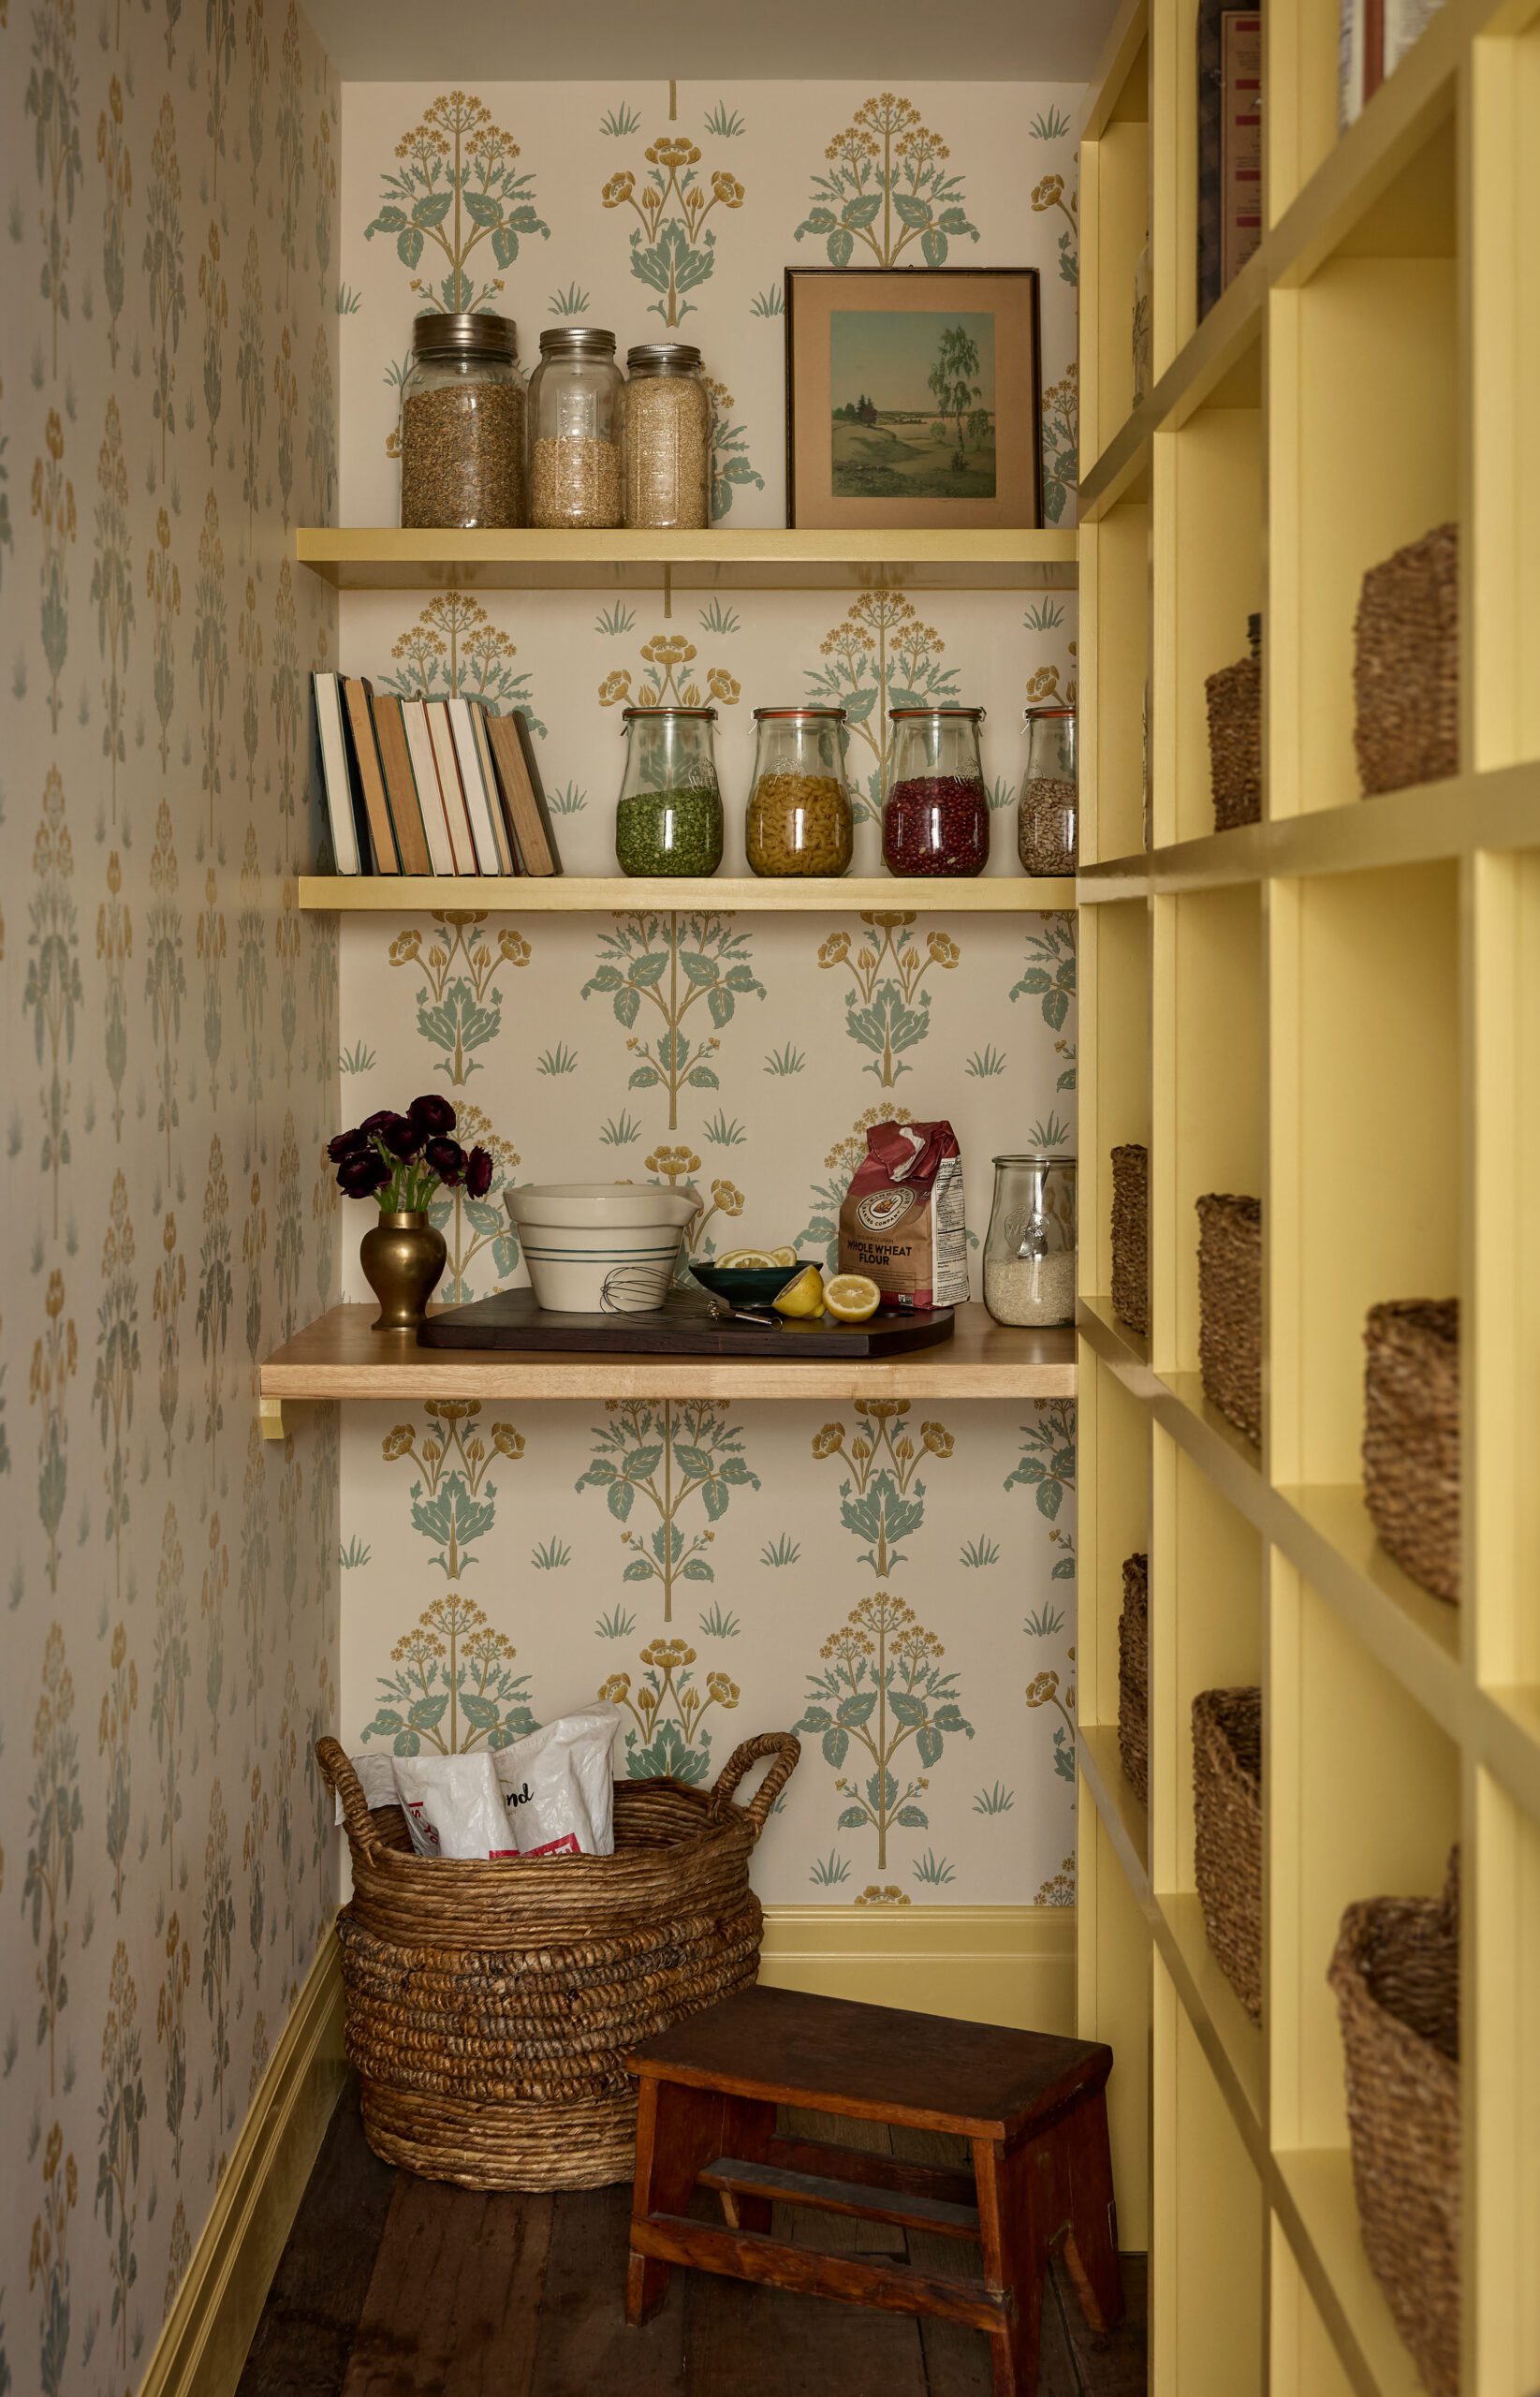 Pantry with a pop of yellow